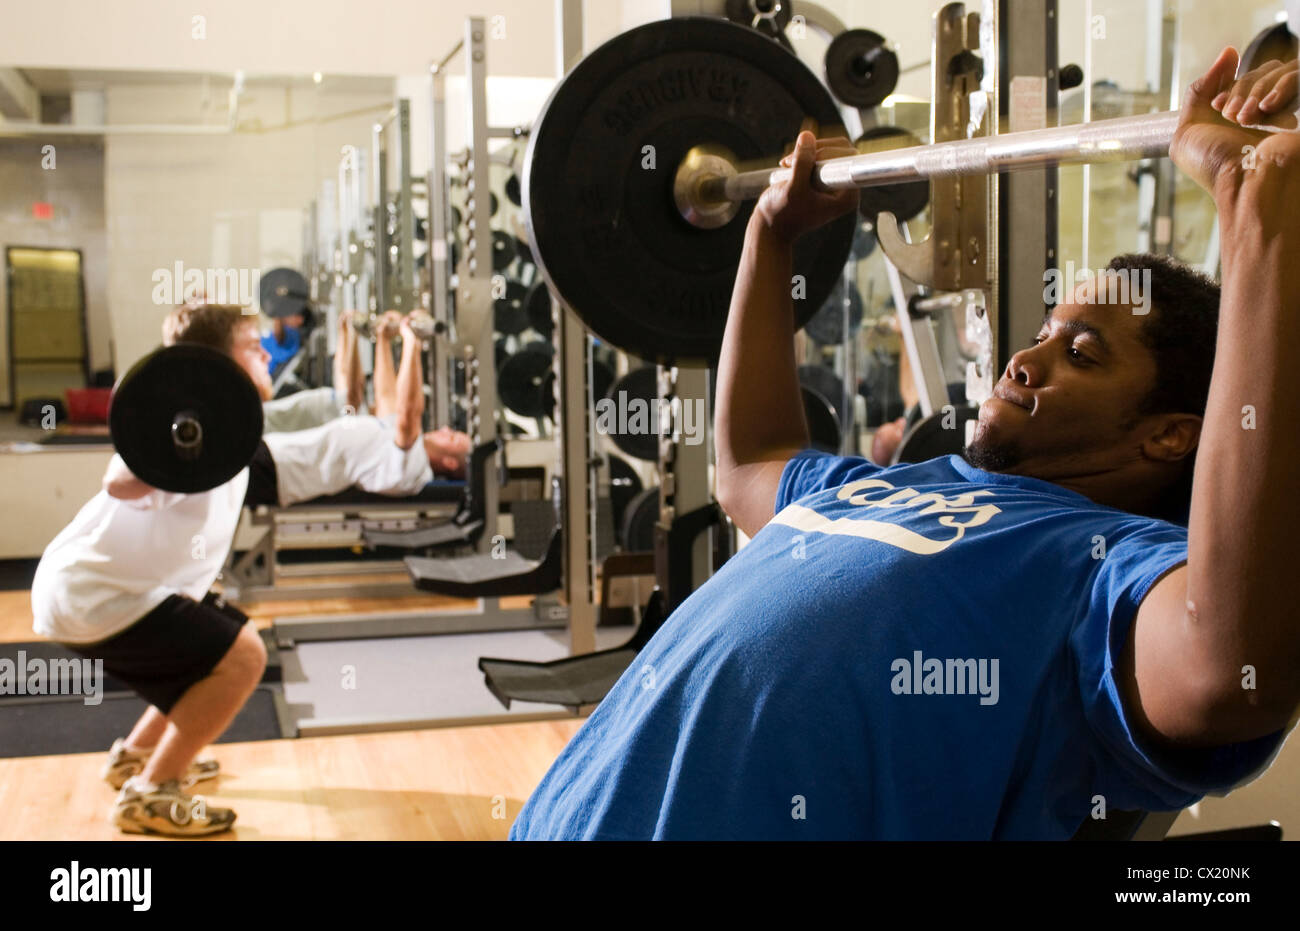 College students train in weight room. Stock Photo